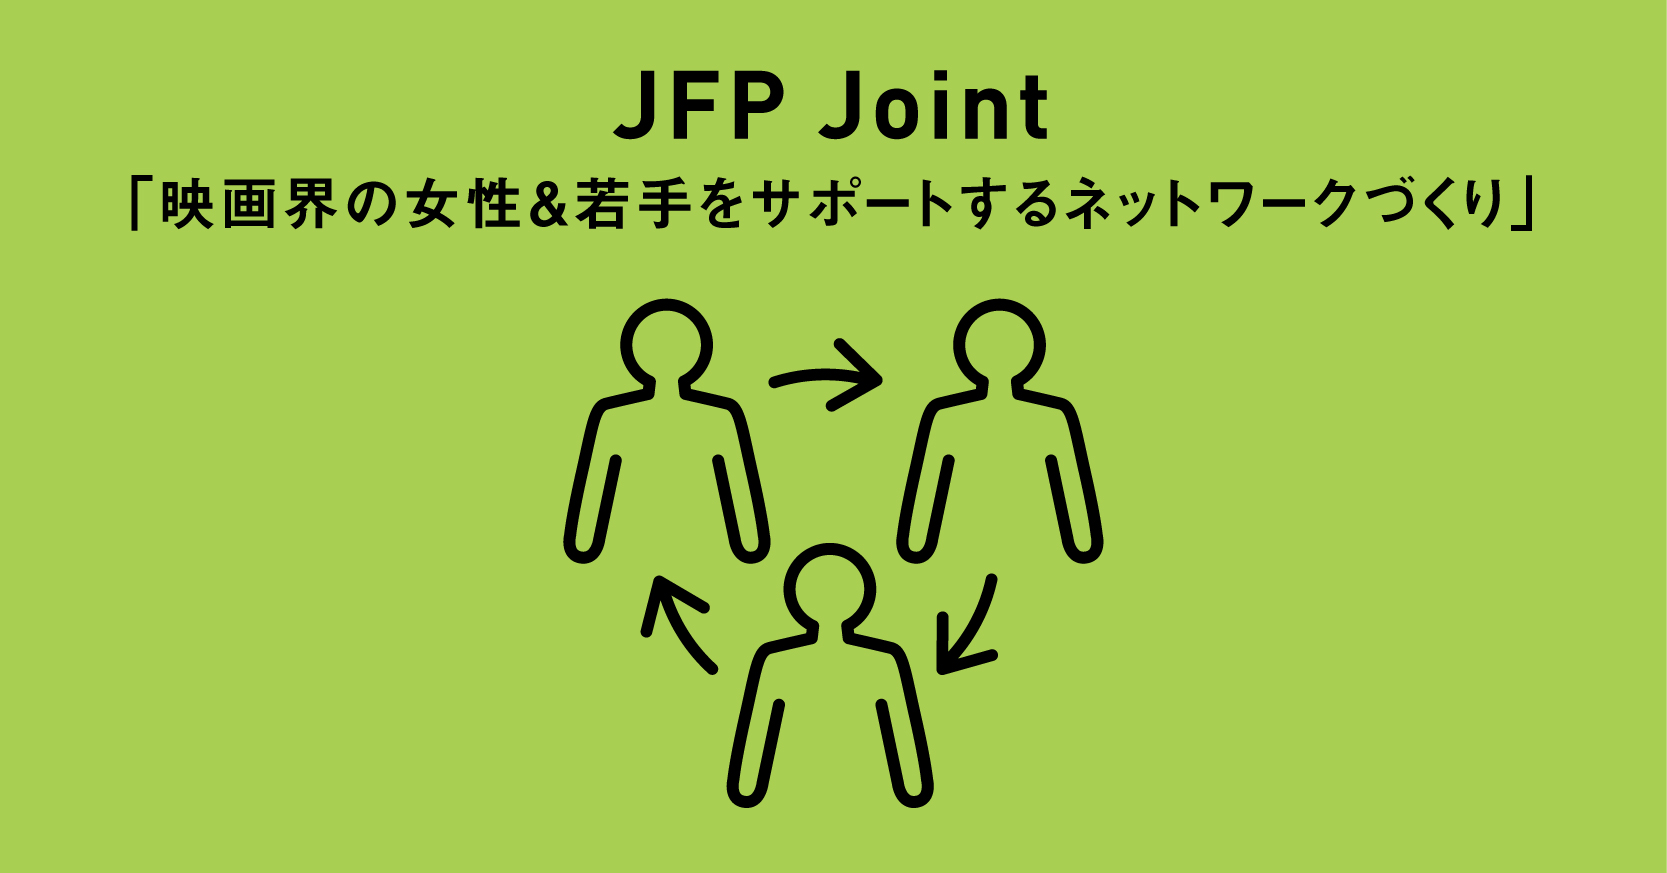 JFP Joint